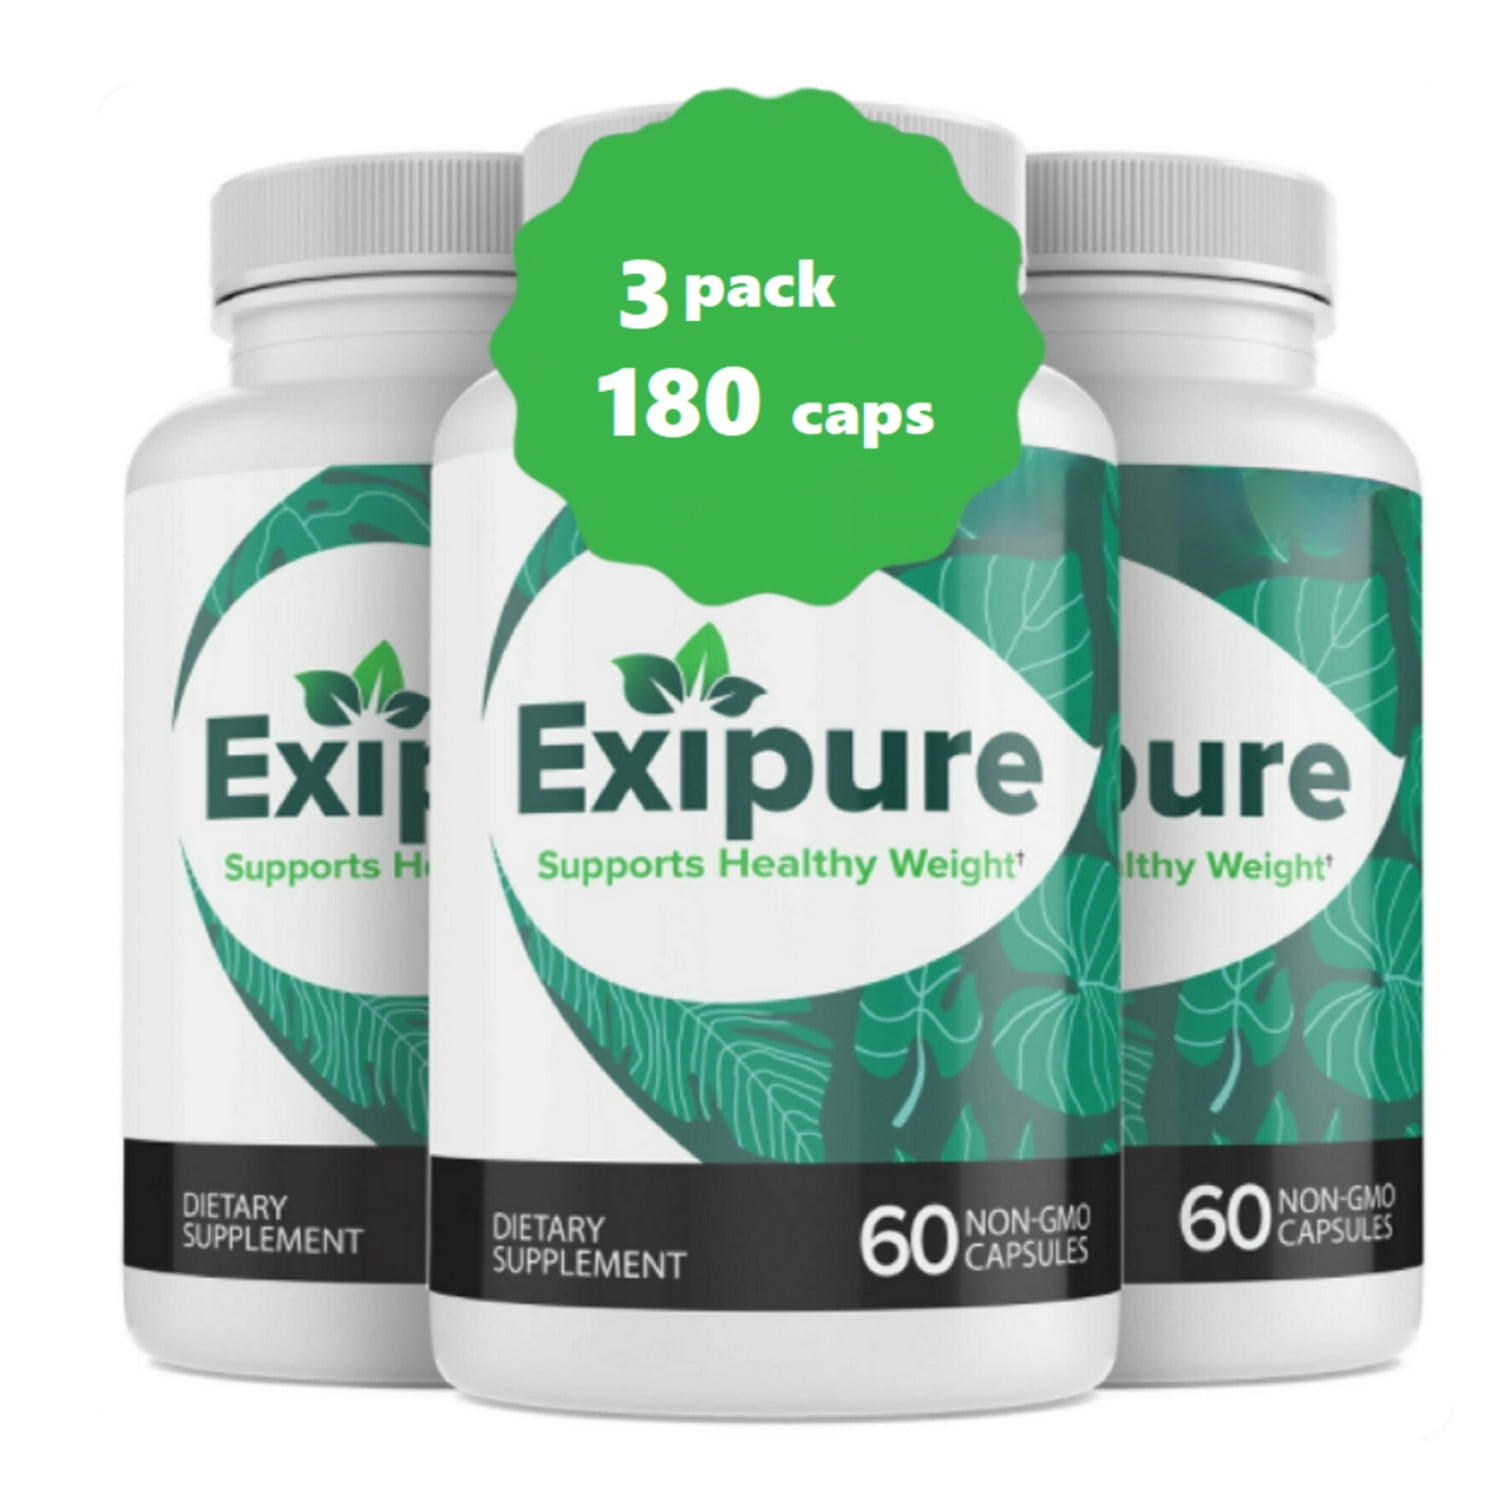 2022 Exipure Review: Is It Legit? Ingredients, Safety, and Real Benefits Miami Herald